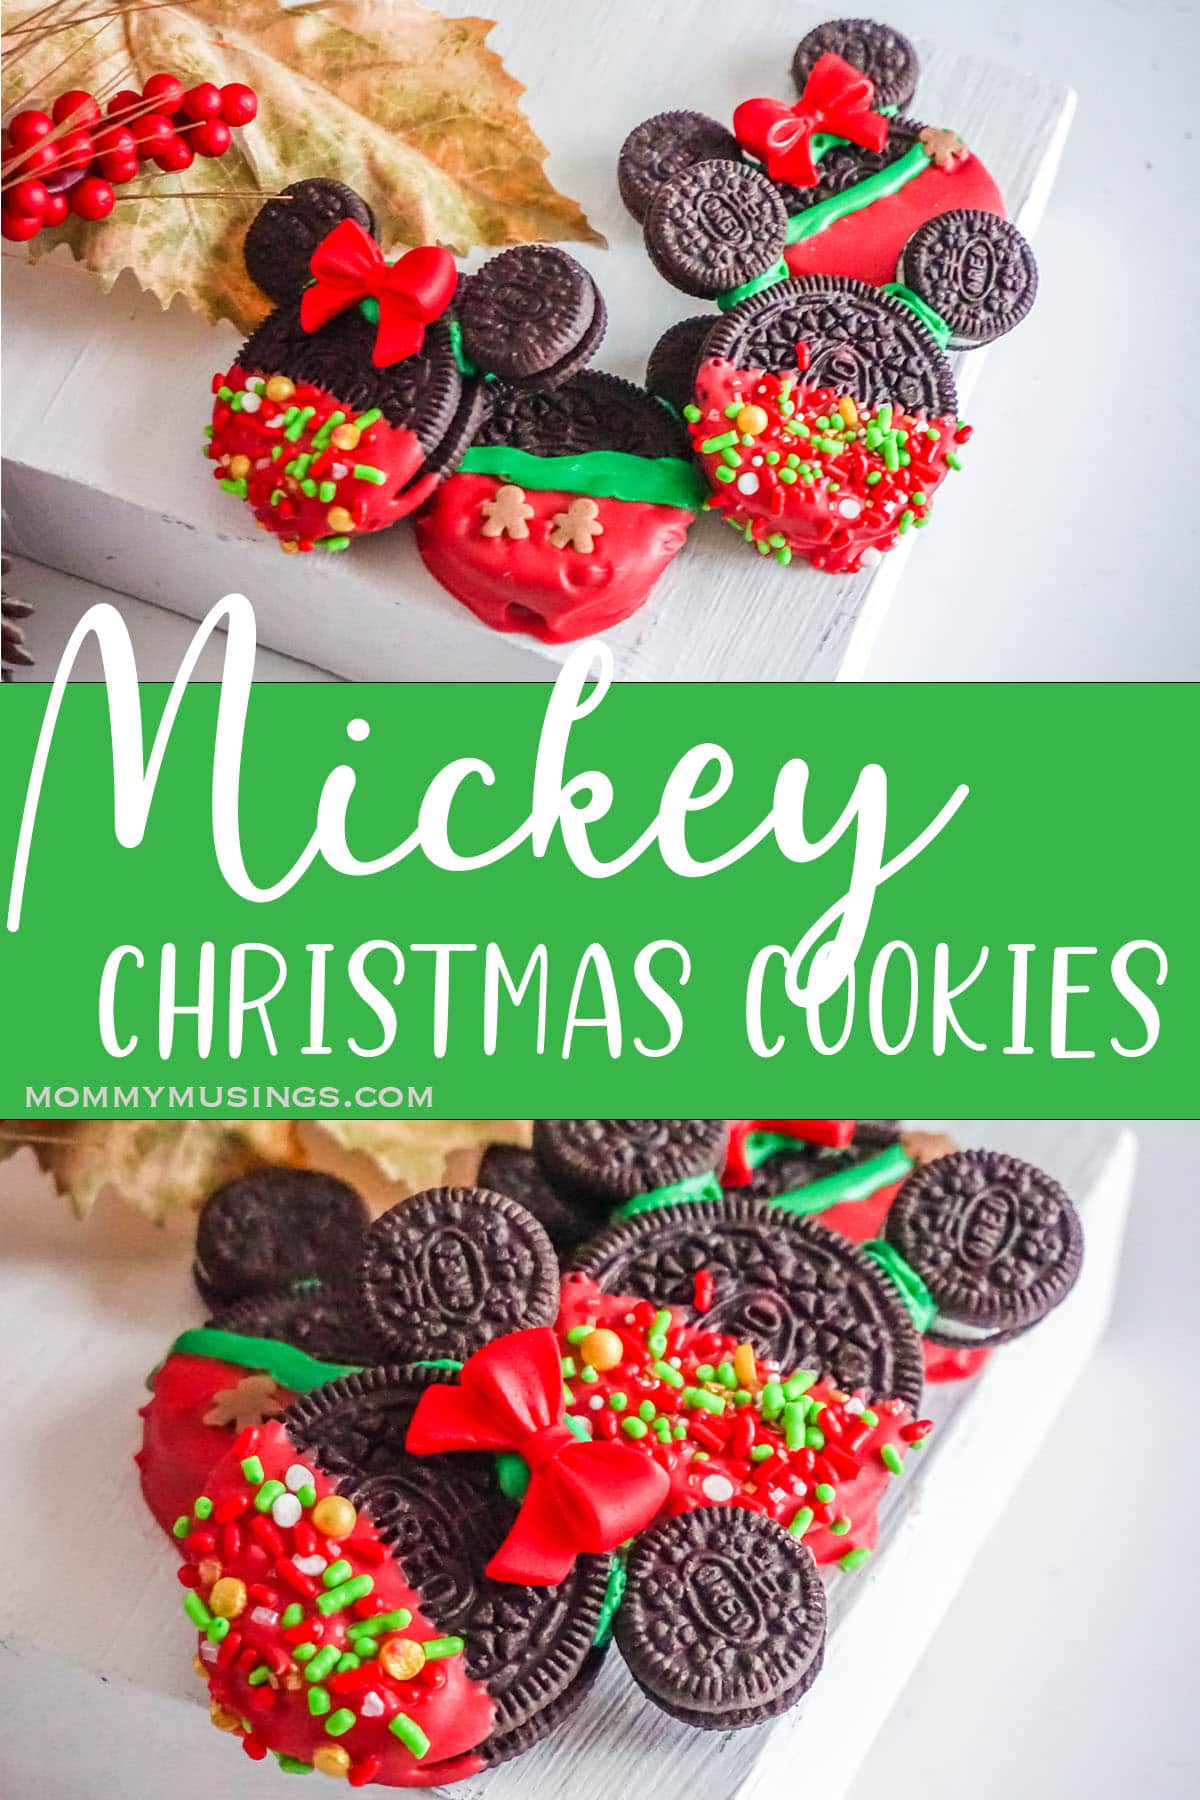 photo collage of easy chocolate dipped oreo cookies for mickey mouse cookies for christmas with text which reads mickey christmas cookies